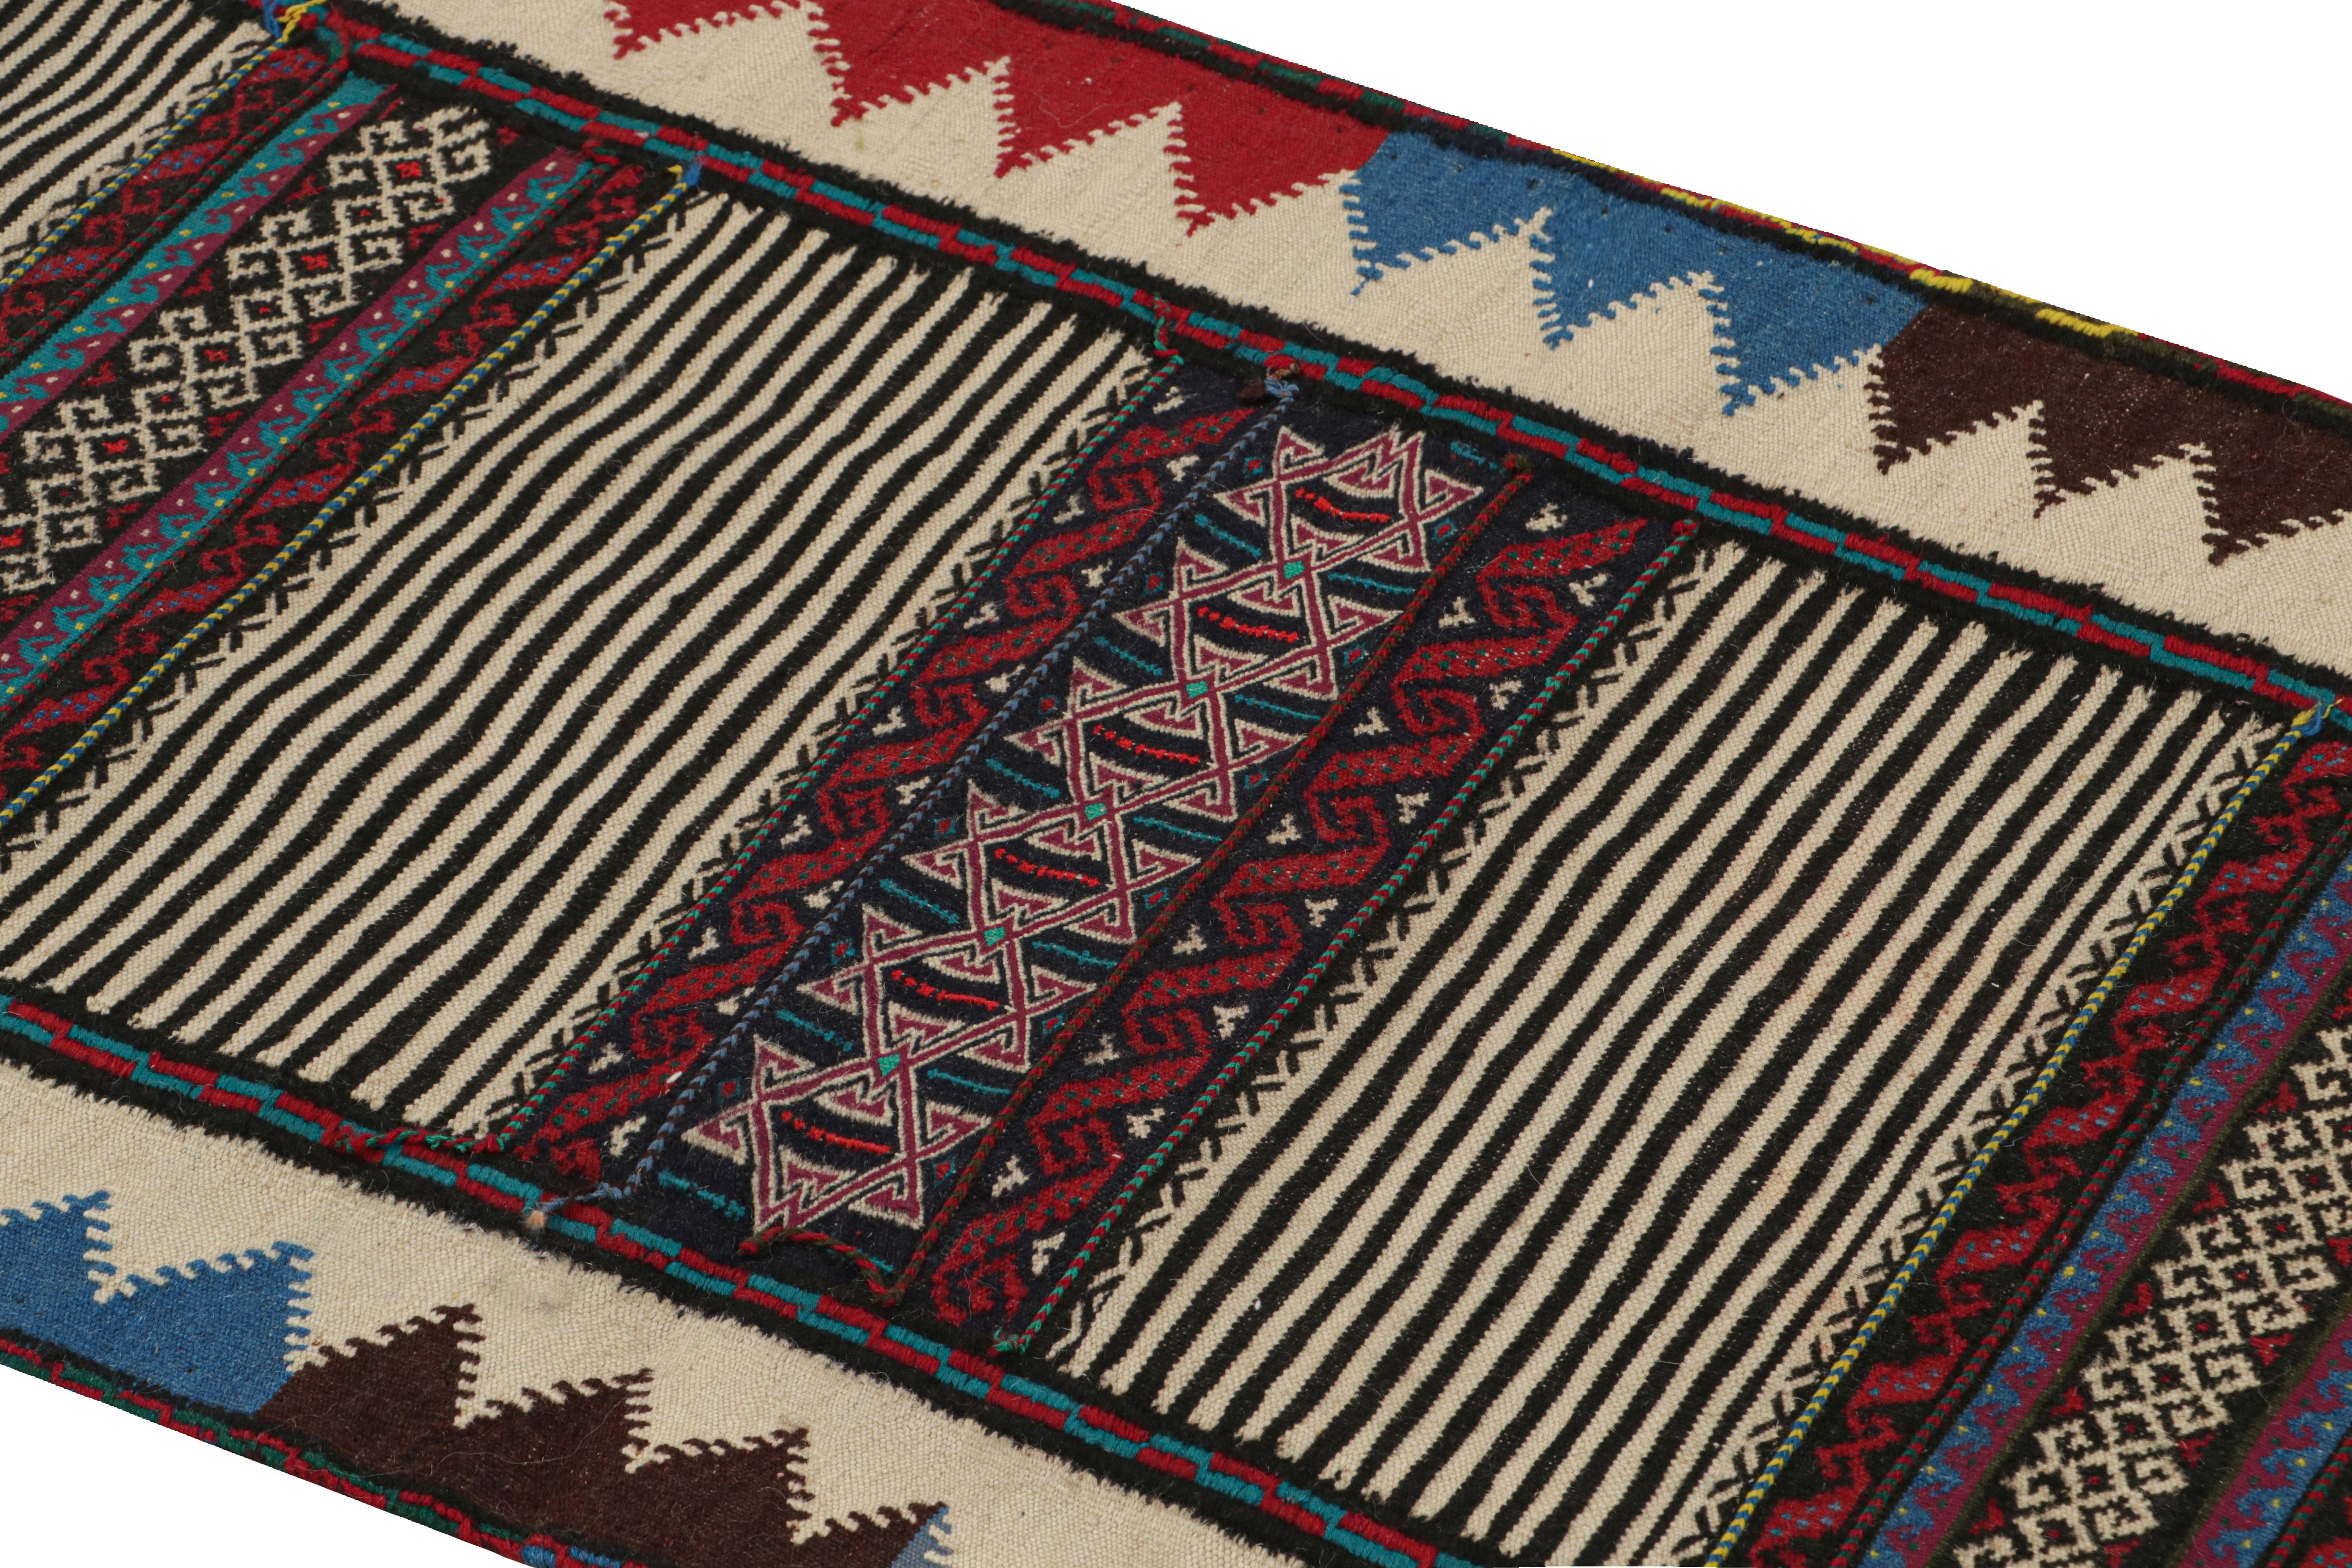 Handwoven in wool, circa 1950-1960, this 2×5 vintage Afghan tribal kilim rug, is a collectible tribal piece that may have been used as table covers in nomadic daily life, much similar to Persian Sofreh Kilims.

On the Design: 

Drawing on Afghan